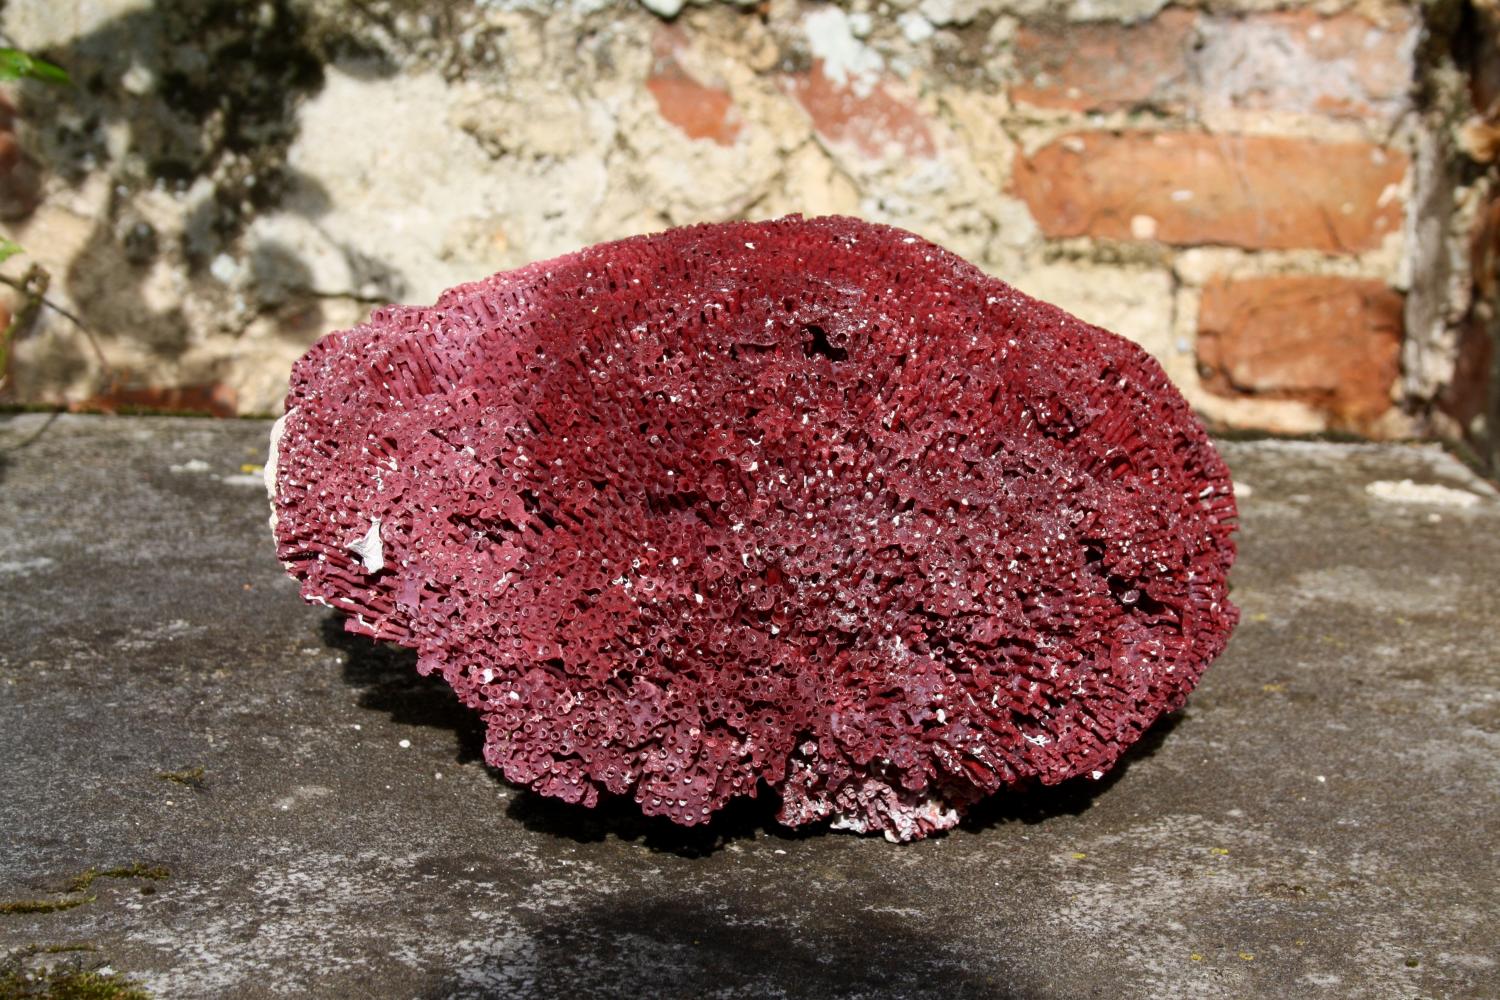 Large piece of red/pink pipe coral